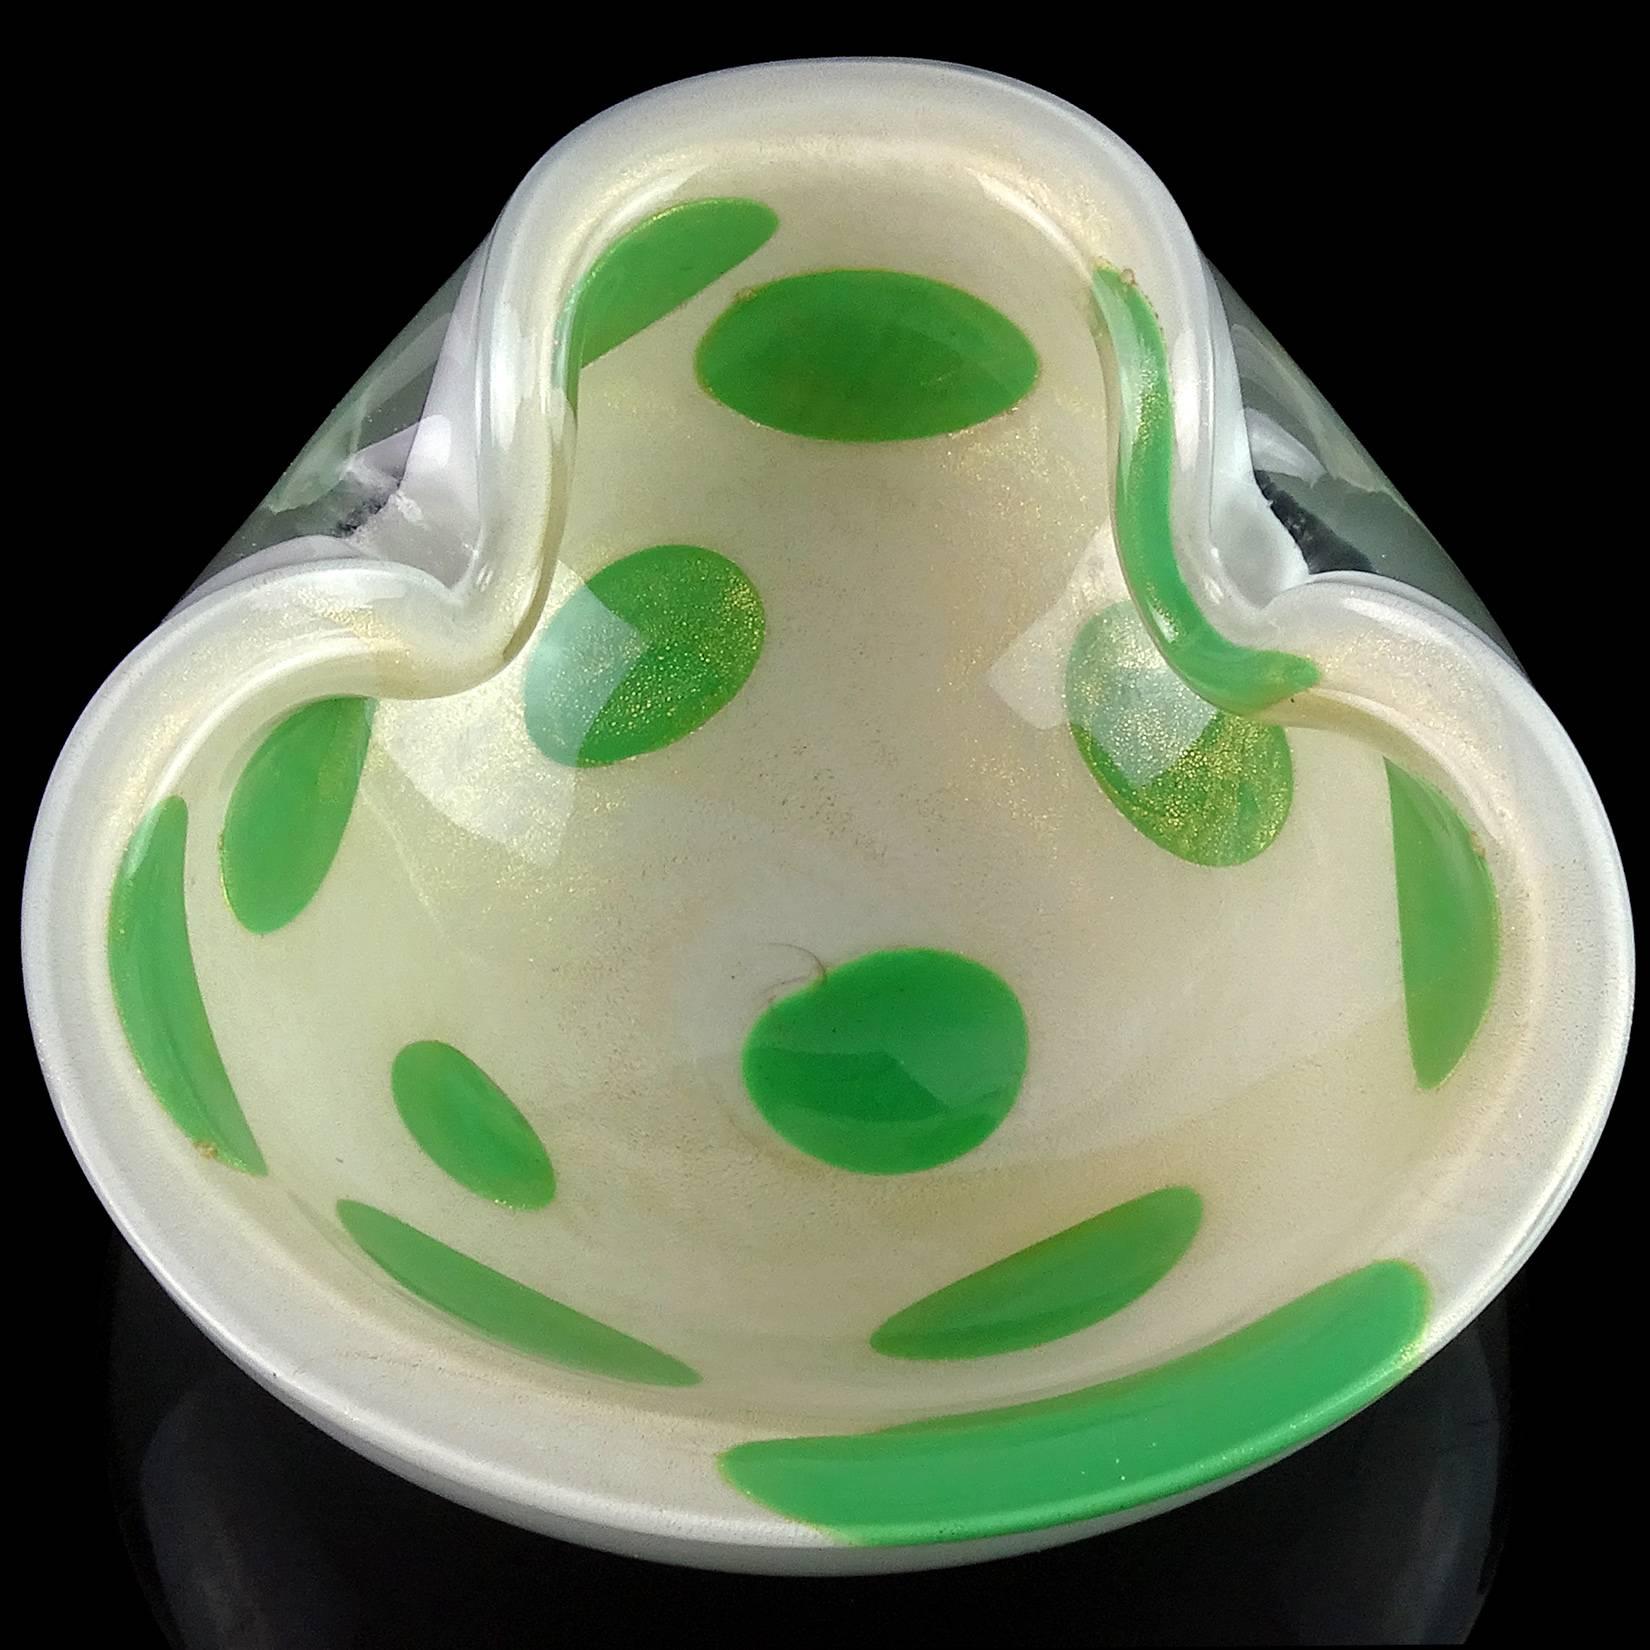 Beautiful Murano handblown white with green spots and gold flecks Italian art glass bowl / dish. Documented to designer Alfredo Barbini. Has heavy gold leaf on the inside of the bowl. Great shape, with two indents on the rim. Measures 6 1/4” x 6